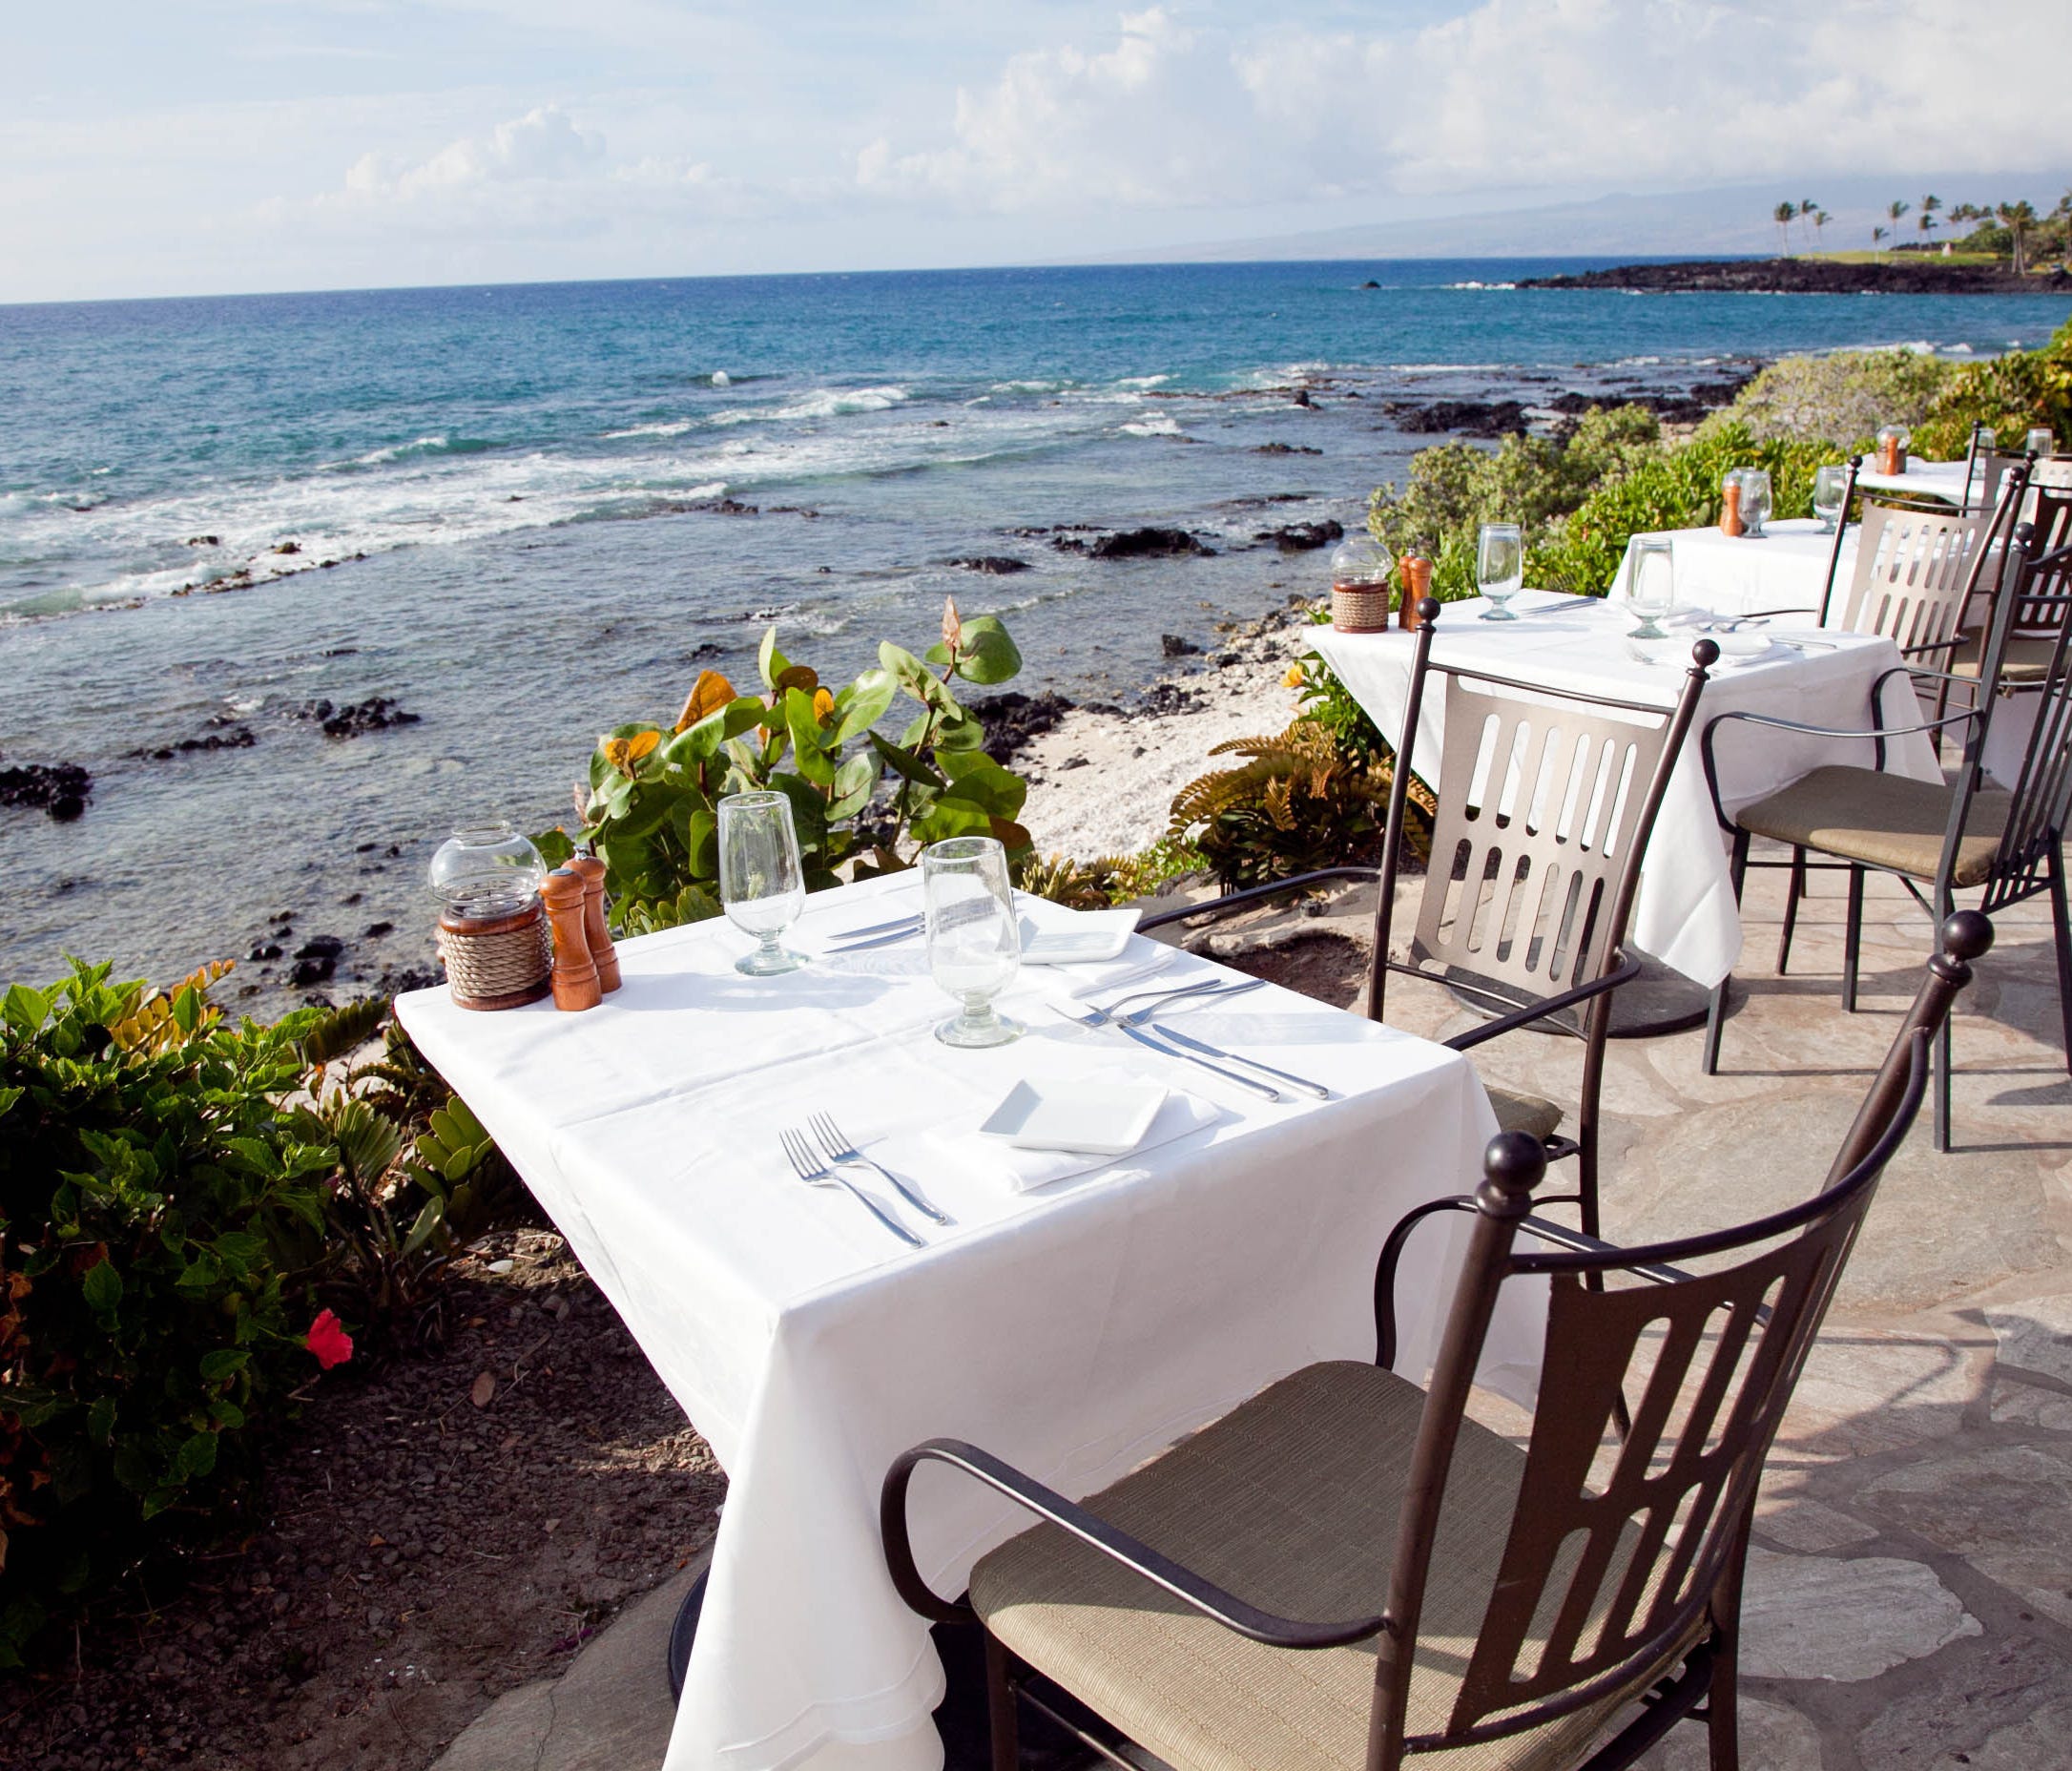 Hilton Waikoloa Village, Hawaii: It's little surprise that Hawaii is home to many hotels that offer plenty of alfresco dining, as stunning views — and great weather — abound. To catch a great sunset at dinner, you'll want to consider Hilton Waikoloa 